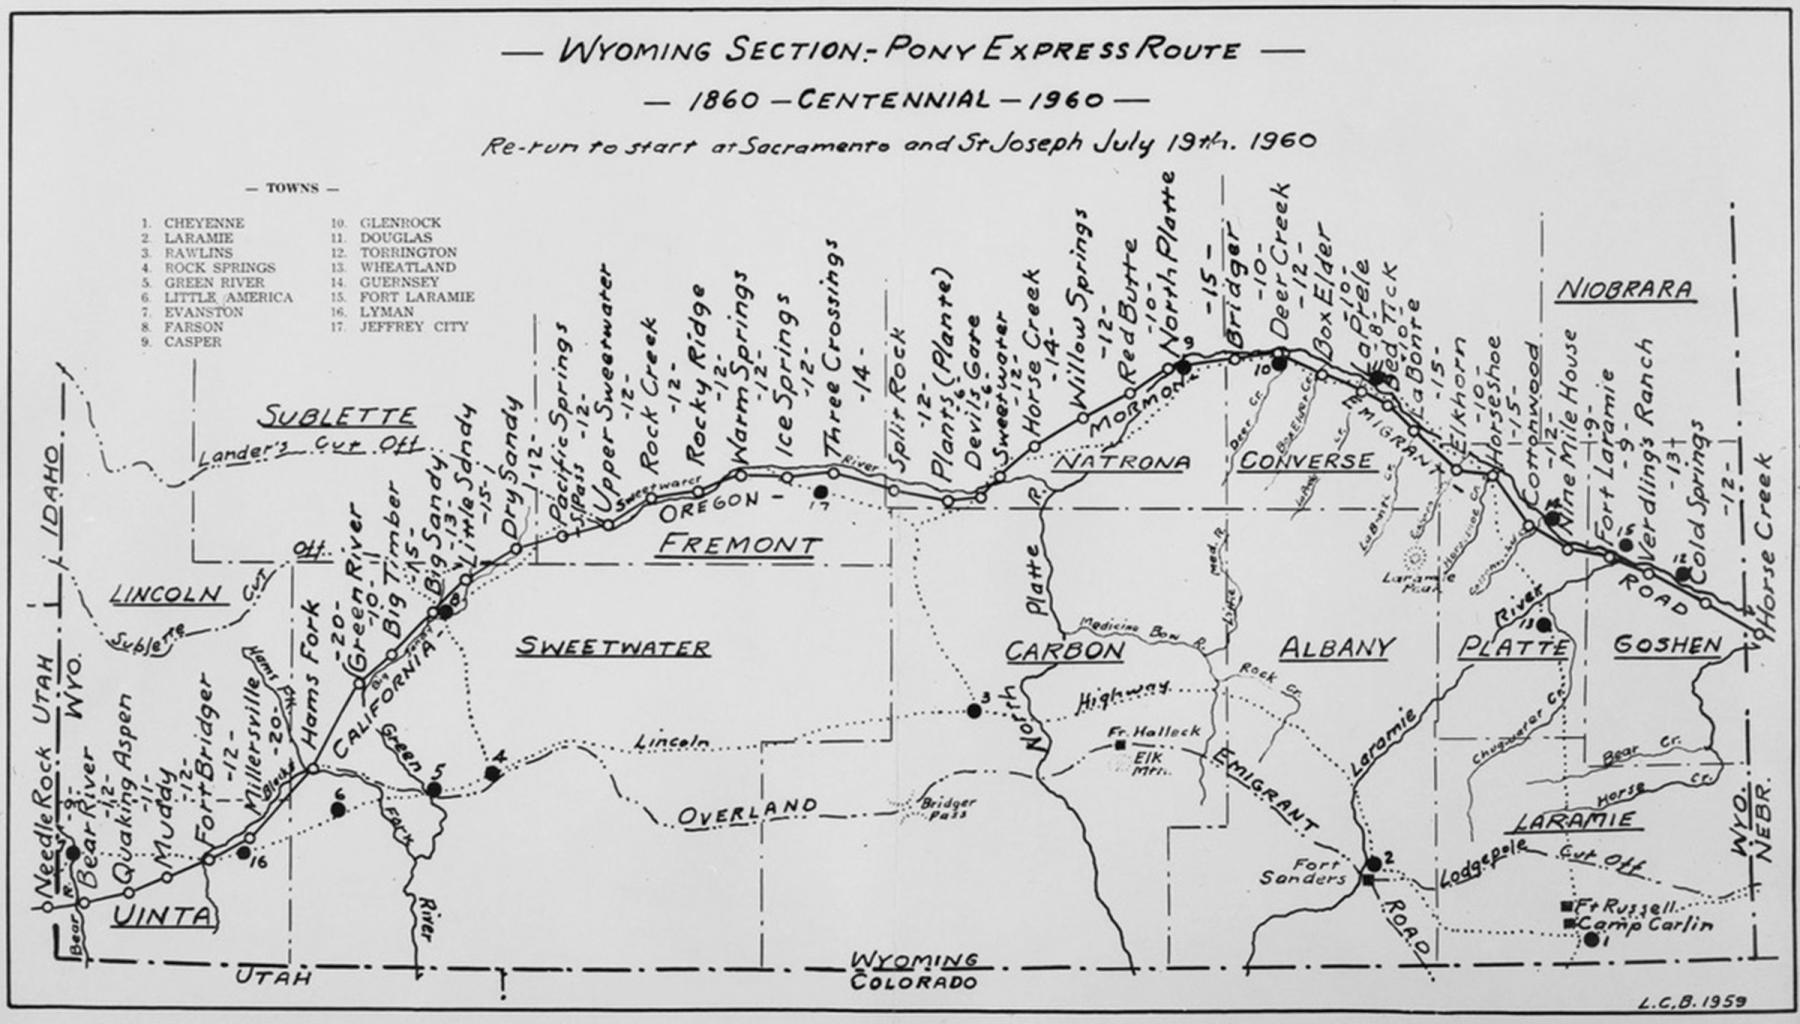 This map of the route and stations of the Pony Express through what’s now Wyoming was drawn by trails historian L.C. Bishop in anticipation of 1960 centennial celebrations. The Wyoming stretch of the route followed the well-established Oregon-California-Mormon trail. State and county lines are modern; Wyoming and its counties did not exist at the time of the Pony Express. American Heritage Center.